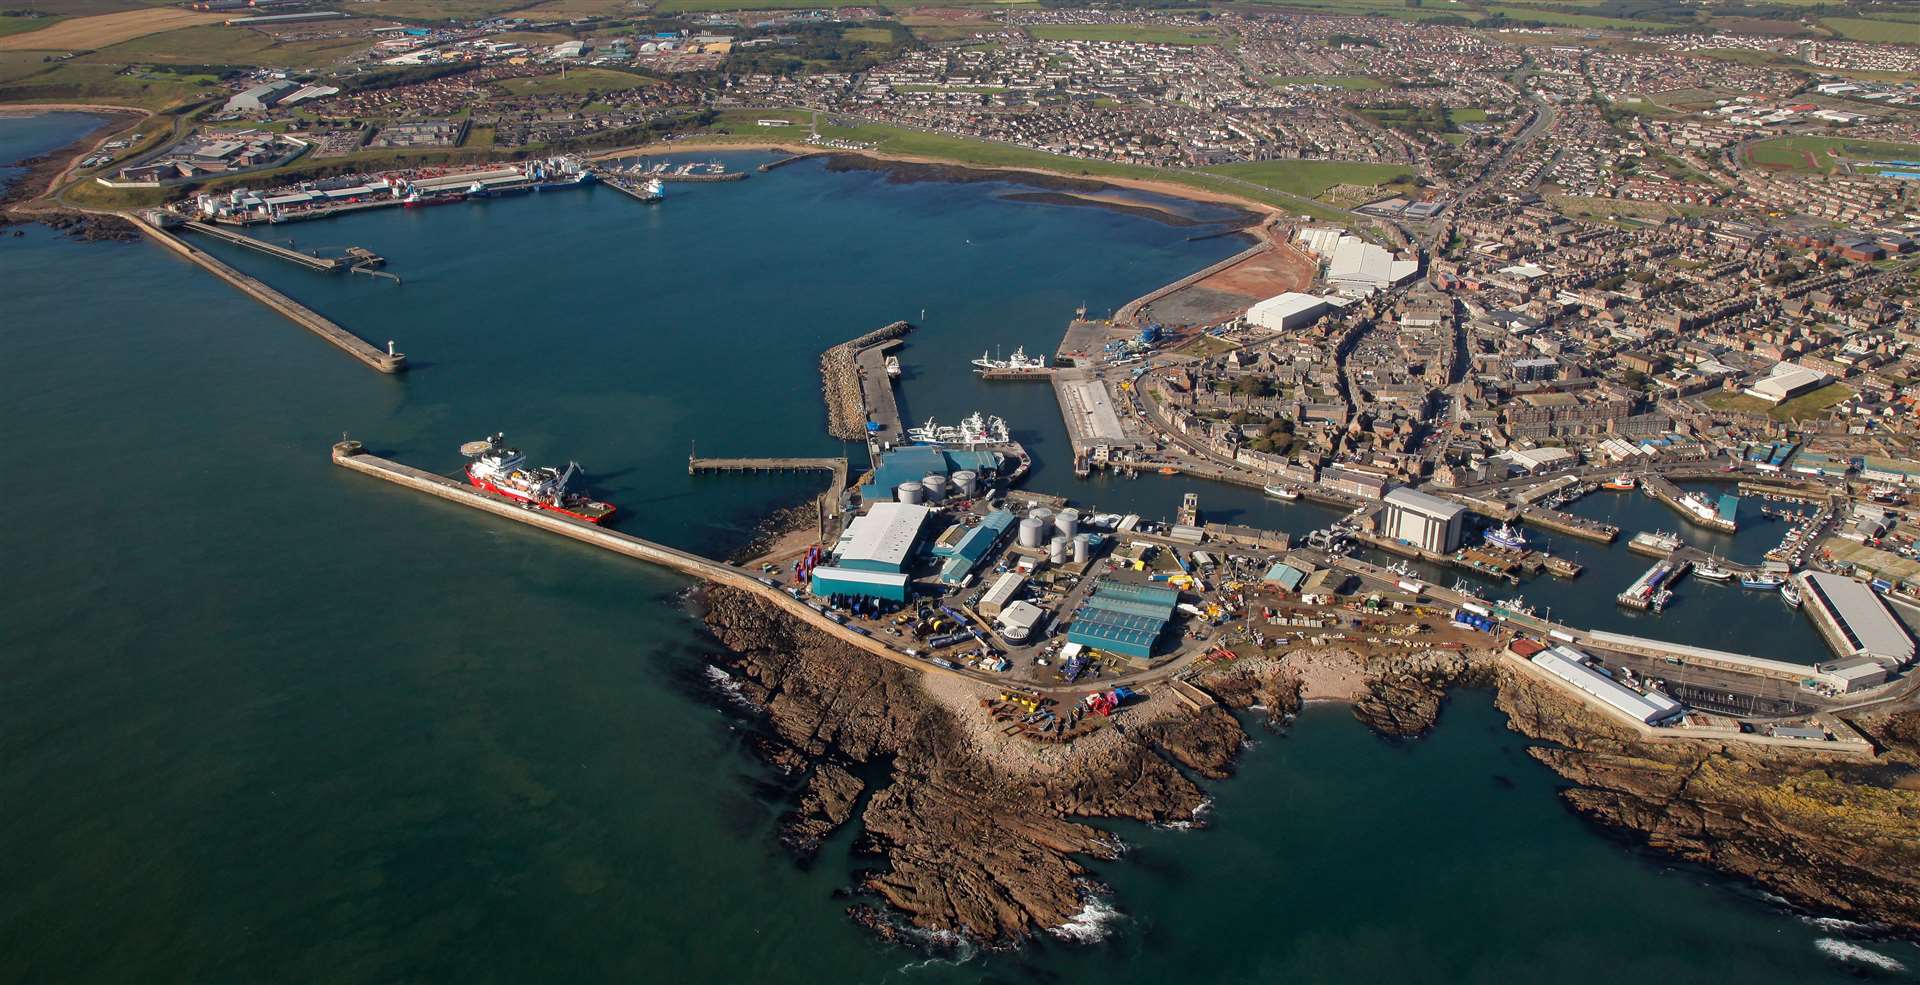 Peterhead is set to receive £20 million from the UK Government over the next decade for regeneration.